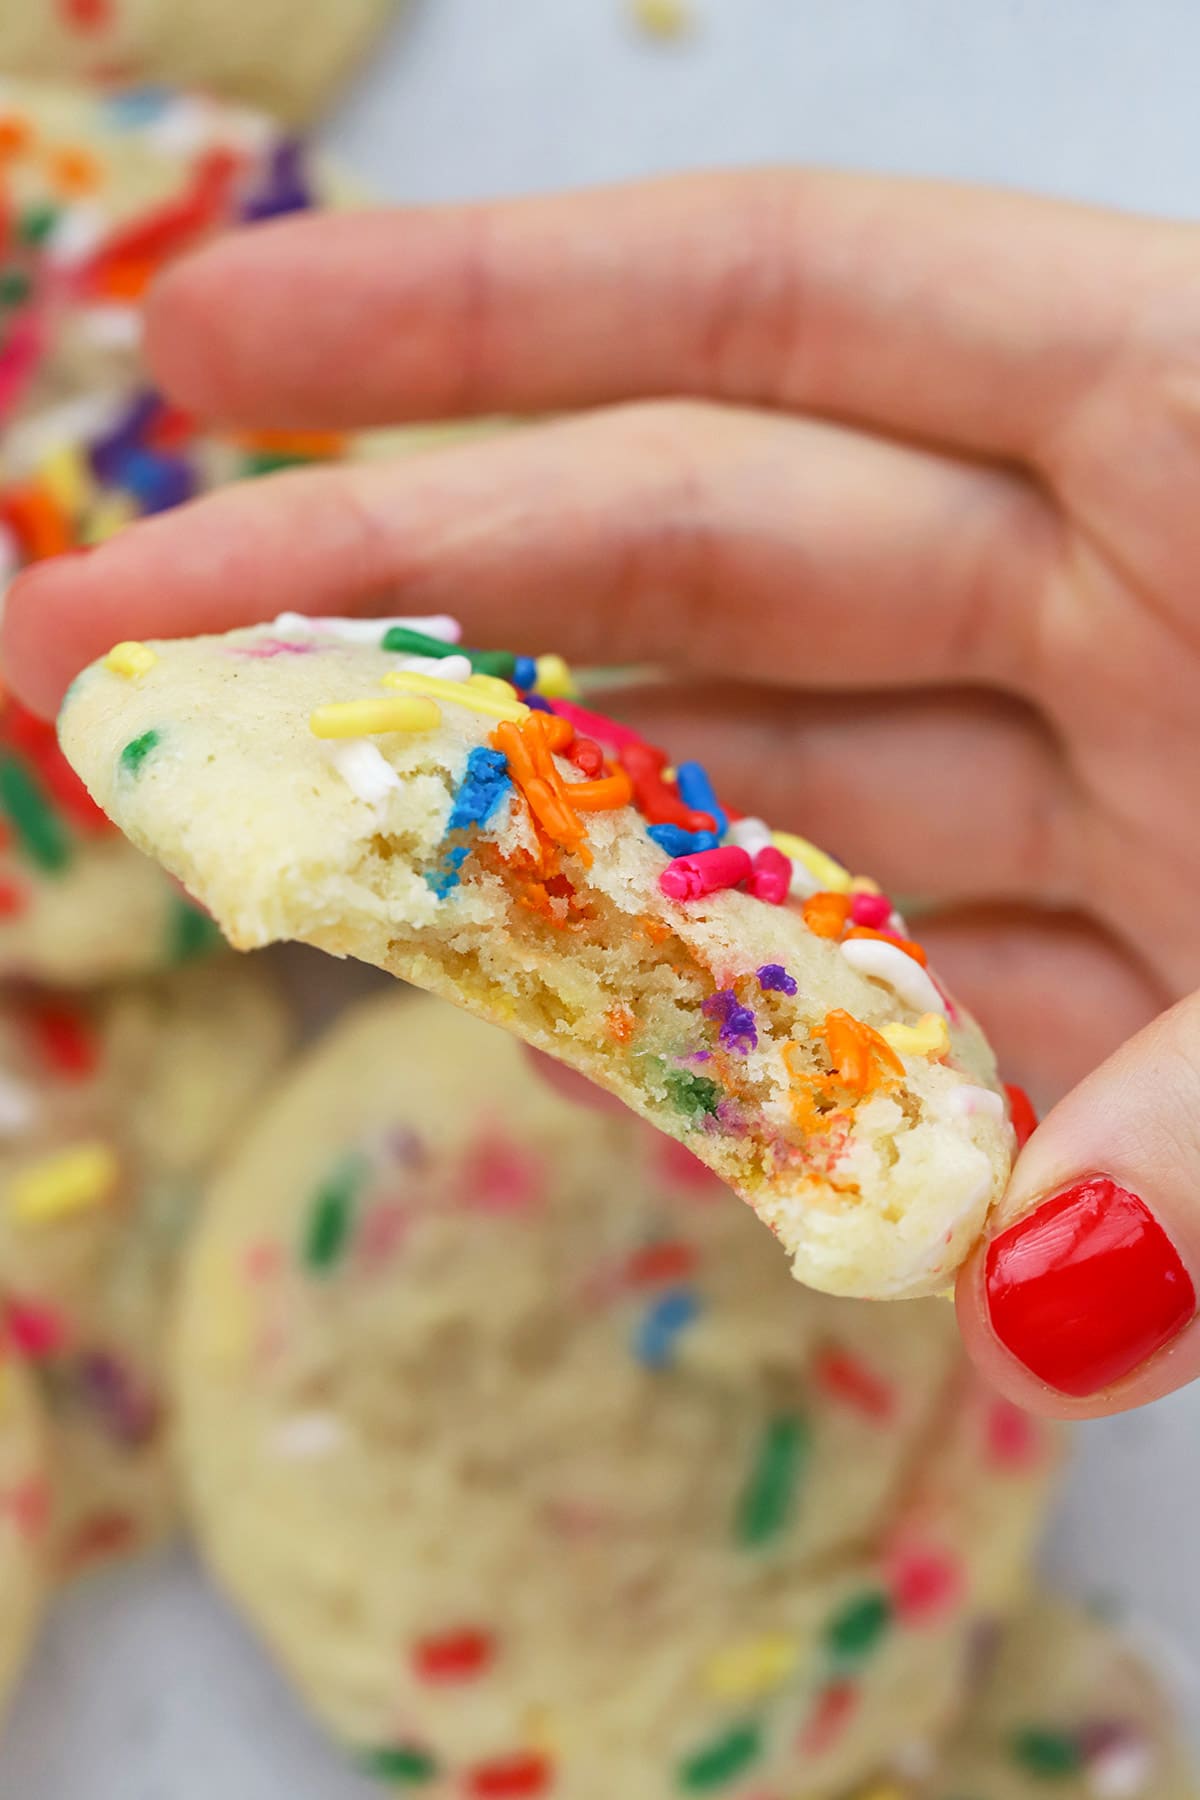 A gluten-free sprinkle sugar cookie with a bite taken out of it, revealing a soft, tender center with sprinkles